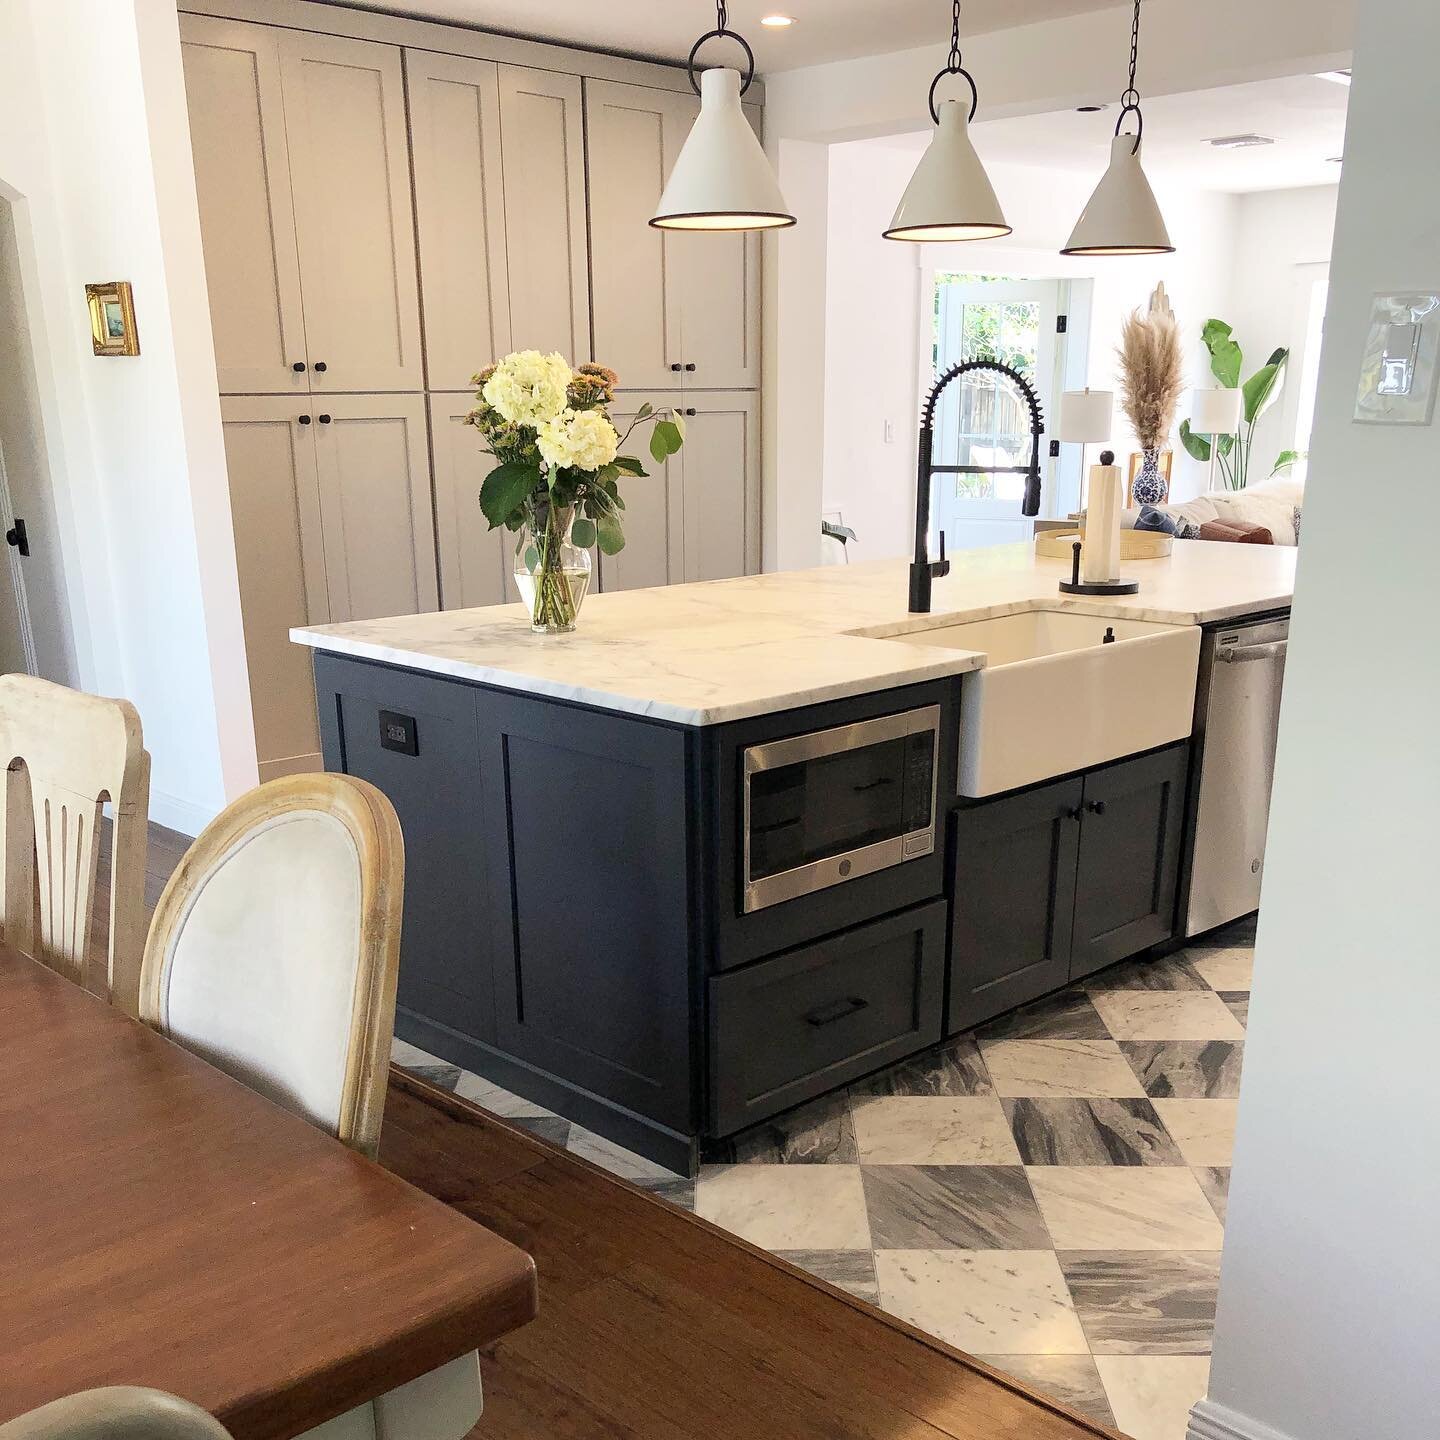 Check out this beauty!
More to come :) KR2 Construction&rsquo;s latest kitchen.
#navycabinets #grayshakers #womancontractor #stpeteremodel #marblecountertops #marbletiles #kitchenremodel #farmsink #openkitchen #pendantlights #honedmarble